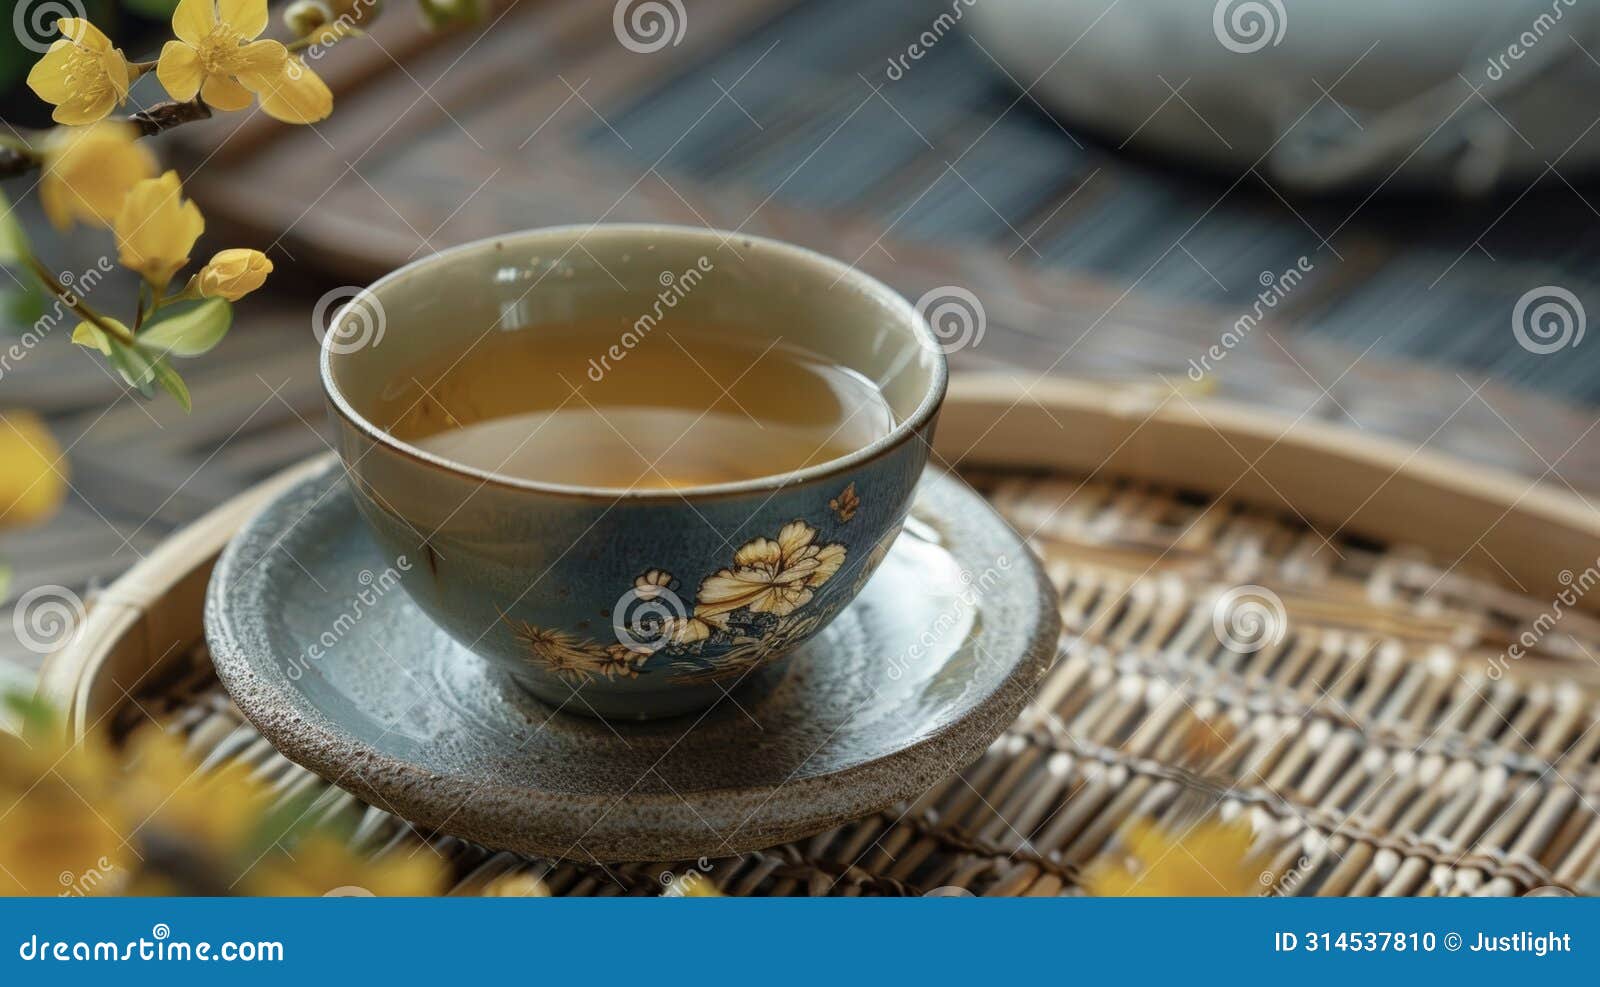 a cup of tea infused with osmanthus flowers believed to have antiinflammatory effects and aid in digestion